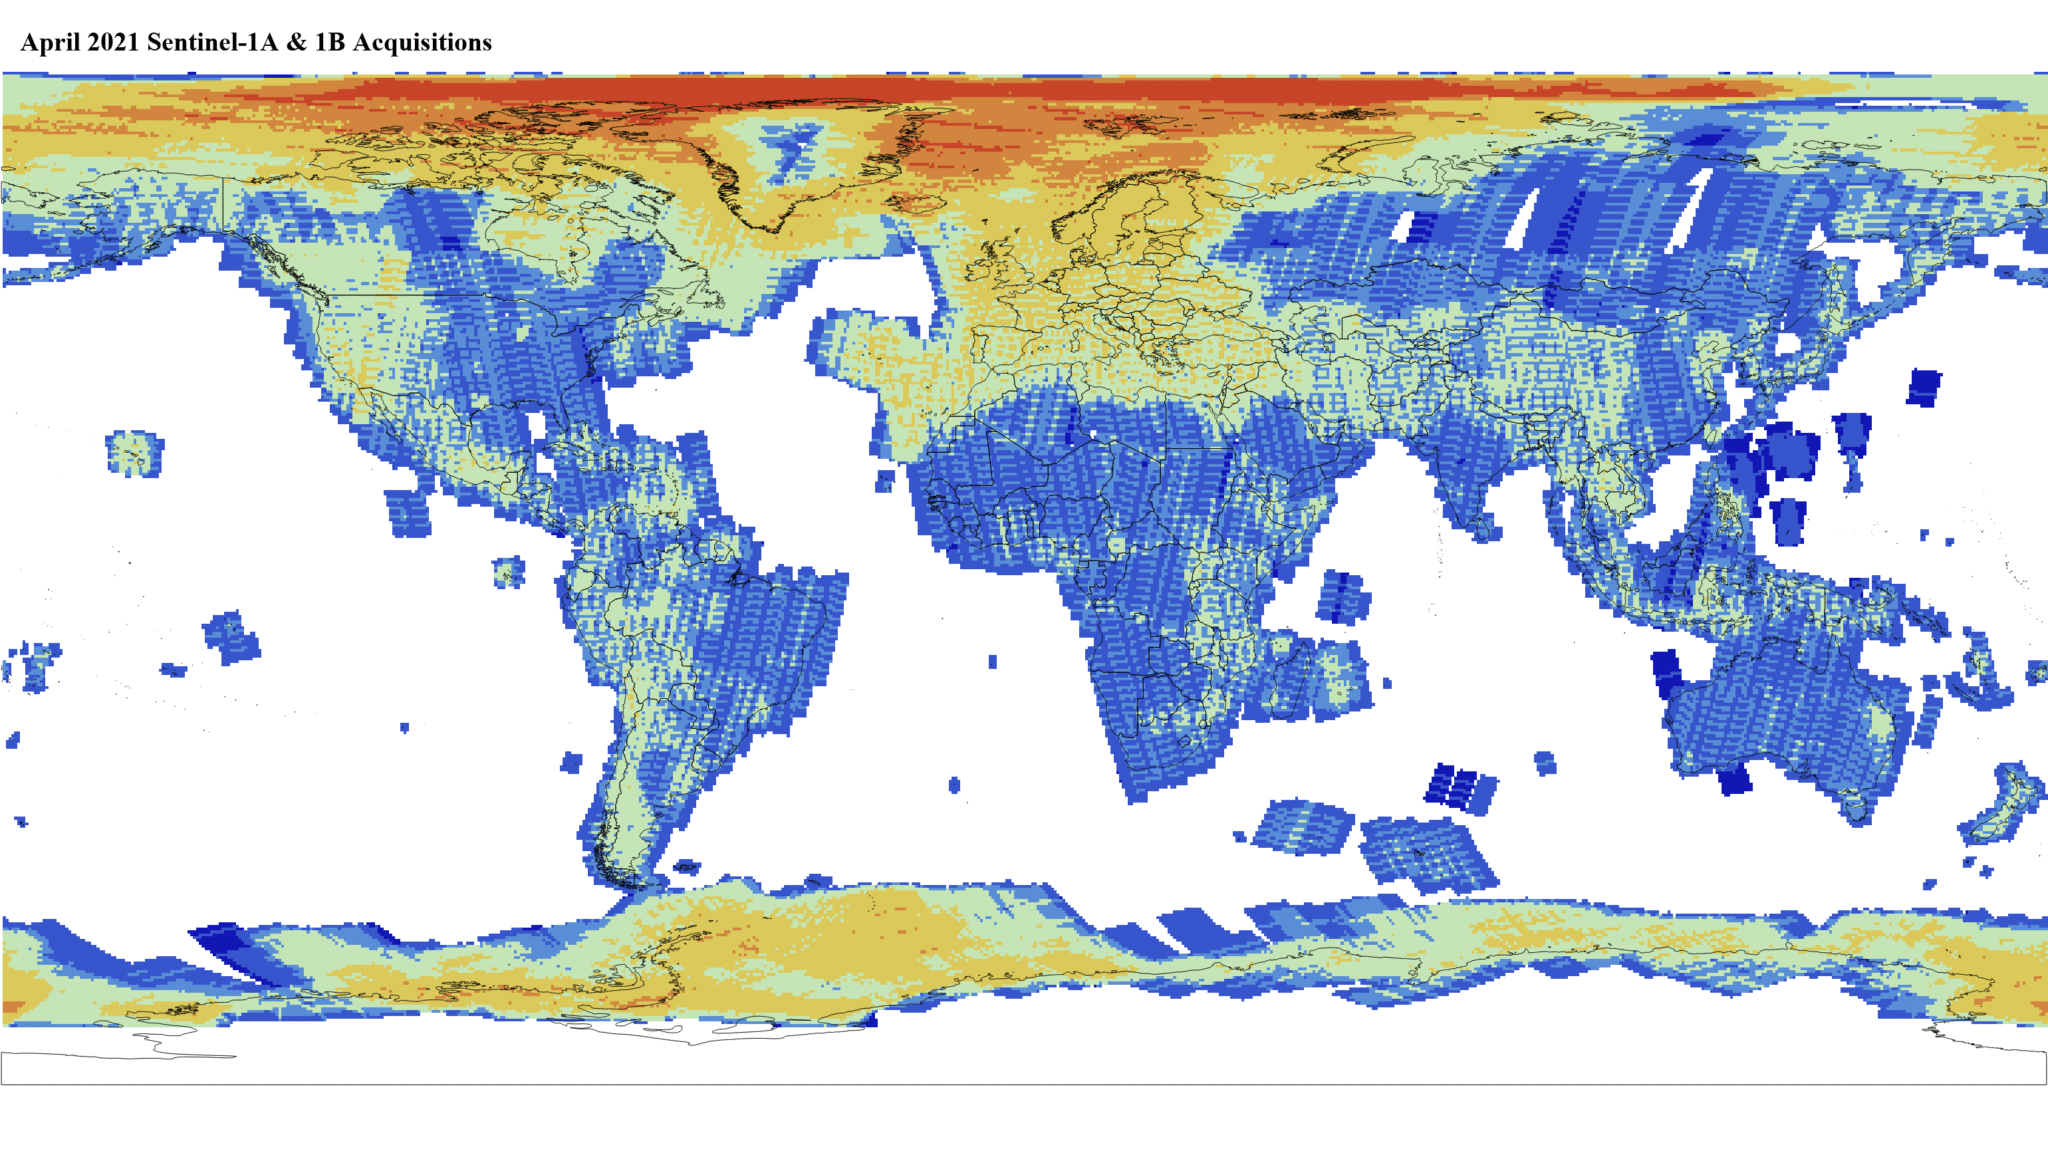 Heat map of Sentinel-1A and -1B GRD global acquisitions April 2021